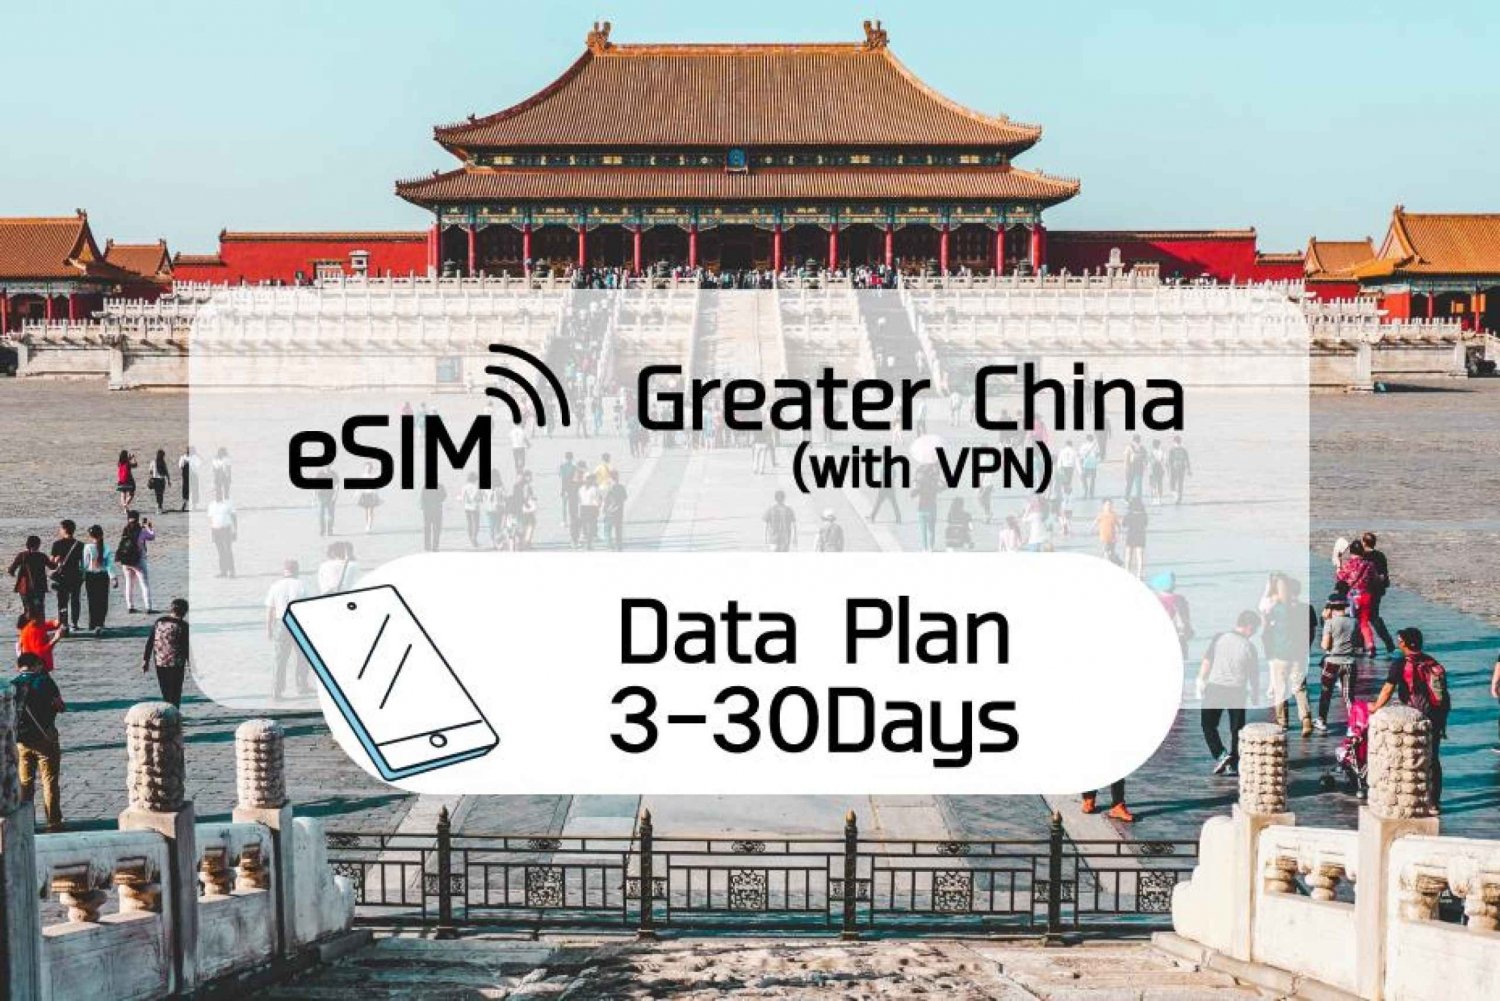 Greater China (with VPN): 5G eSim Mobile Data Day Plan